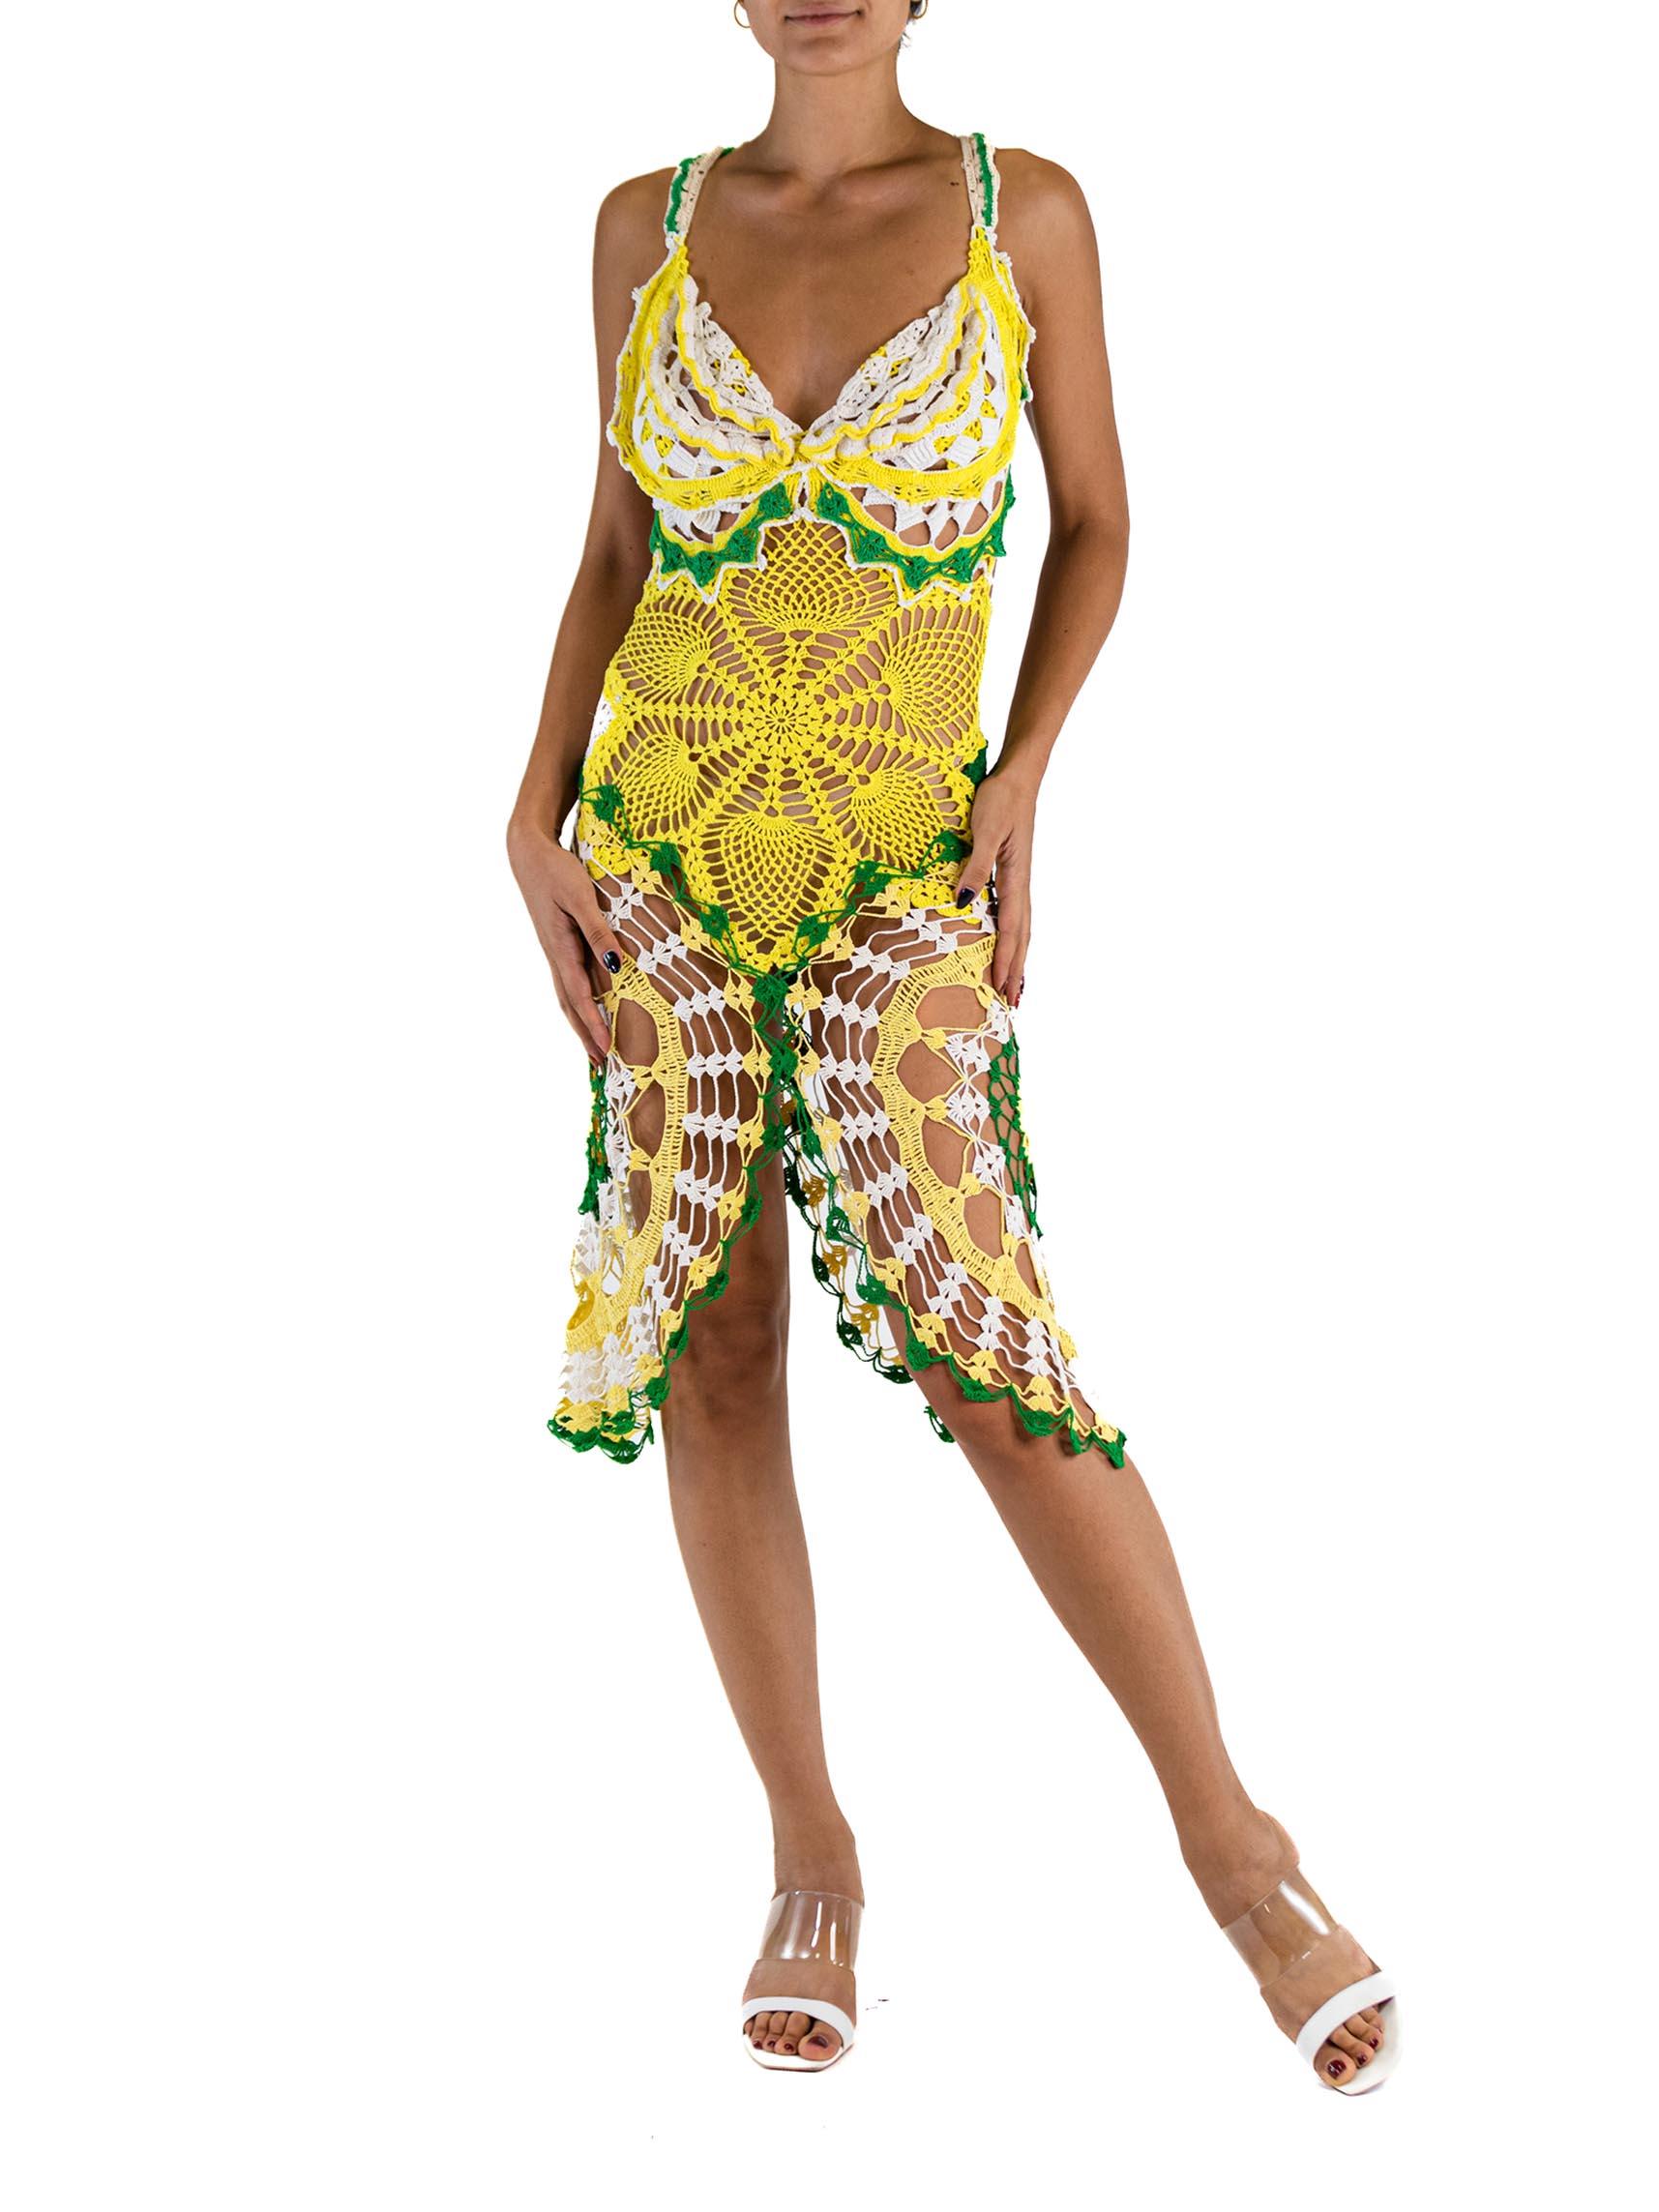 Women's MORPHEW COLLECTION Yellow & Green Cotton Crochet Lace Mid Dress For Sale